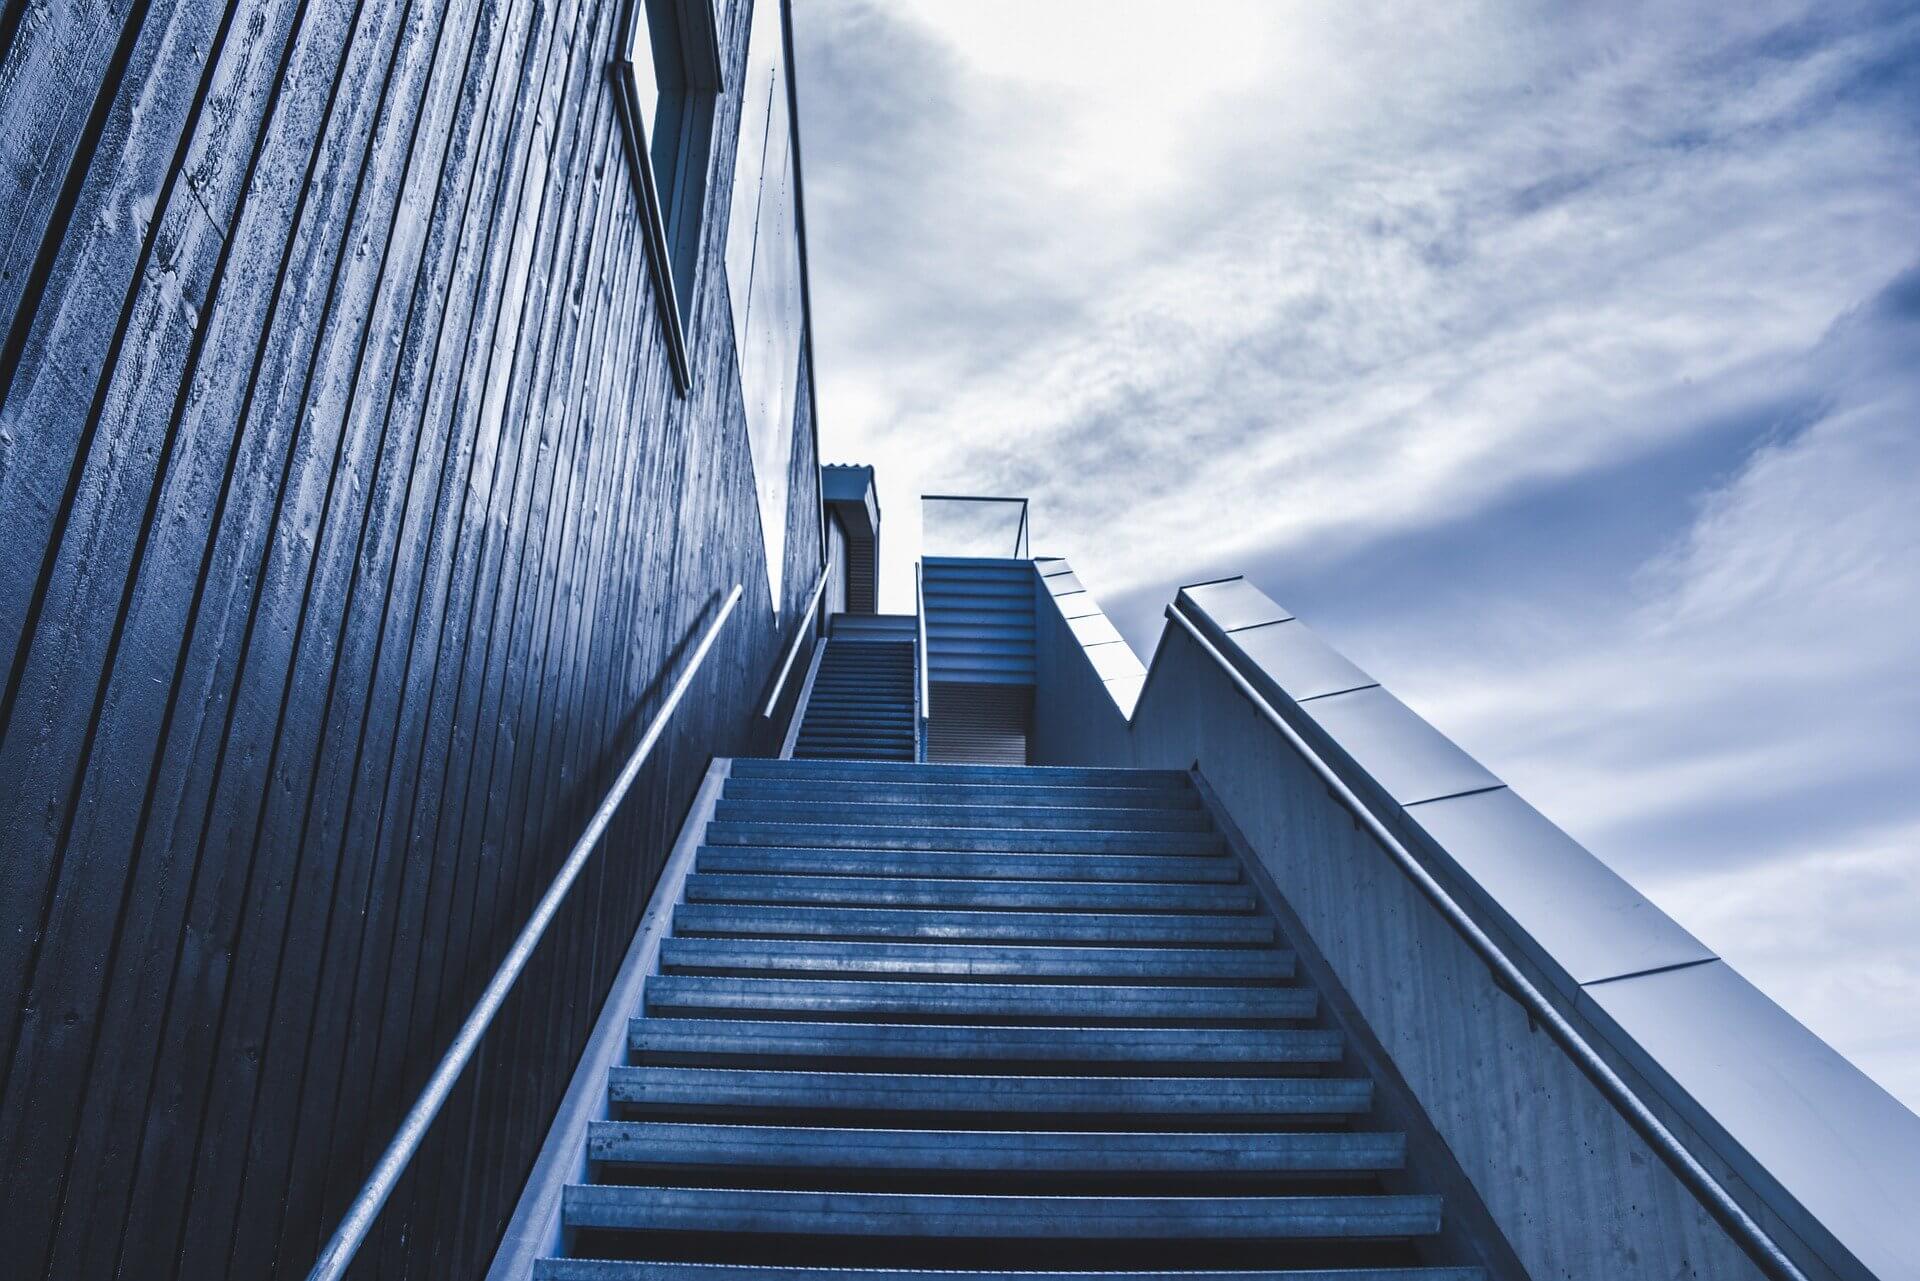 Stairway to the sky implies business growth